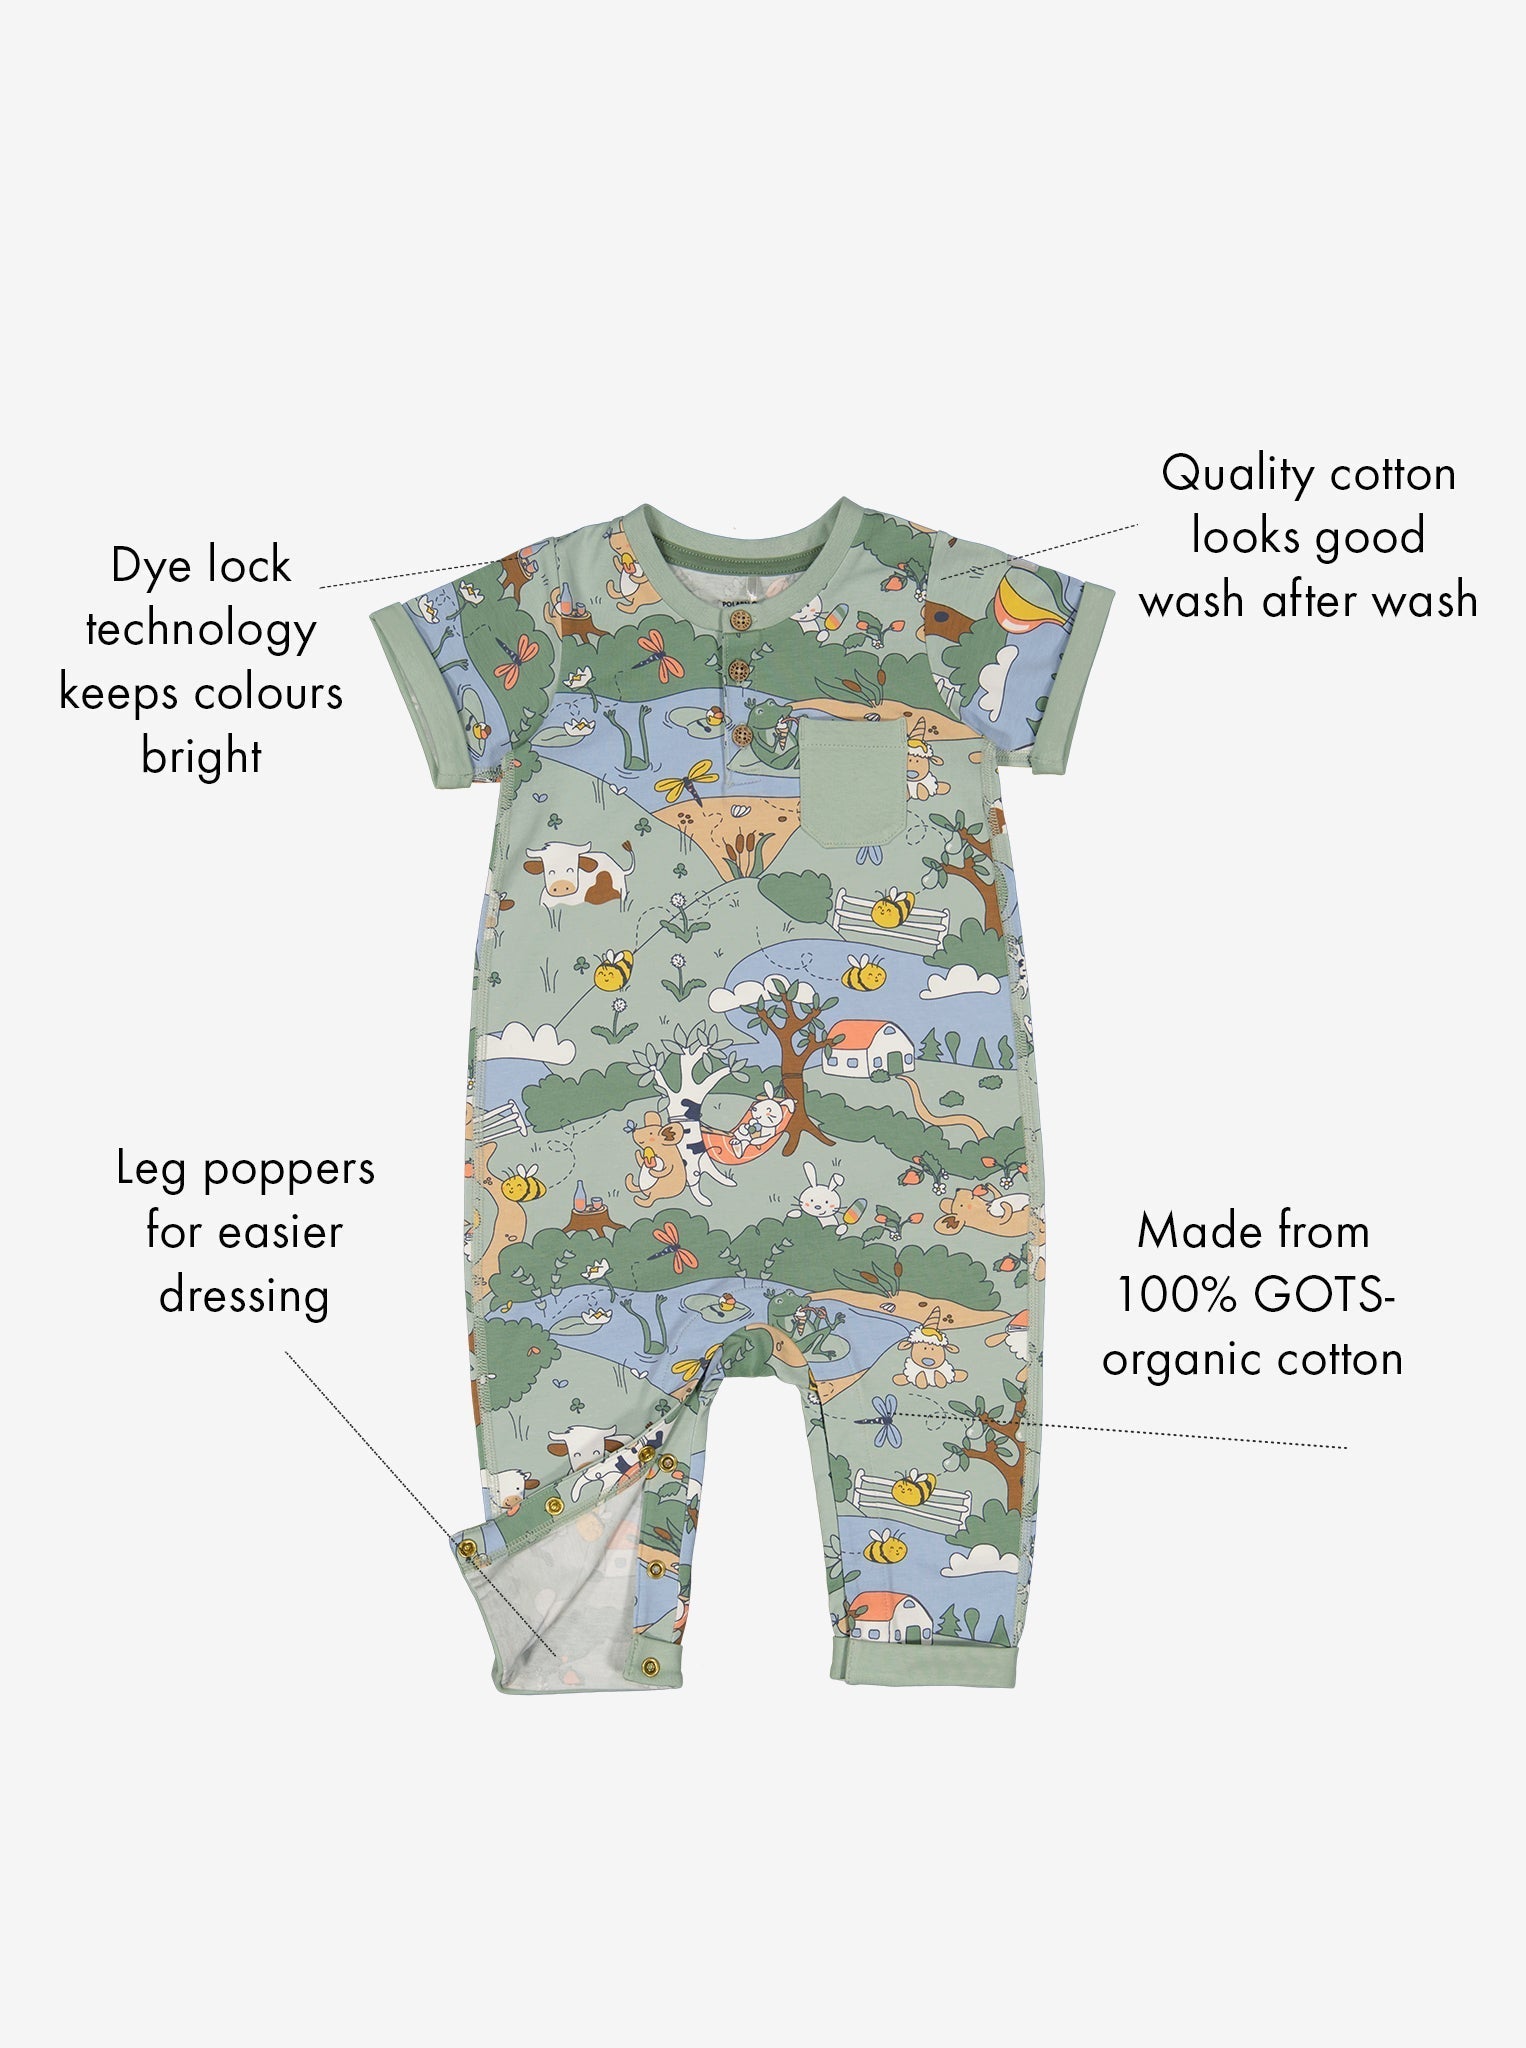 Wildlife Print Green Baby Romper from Polarn O. Pyret Kidswear. Made from ethically sourced materials.